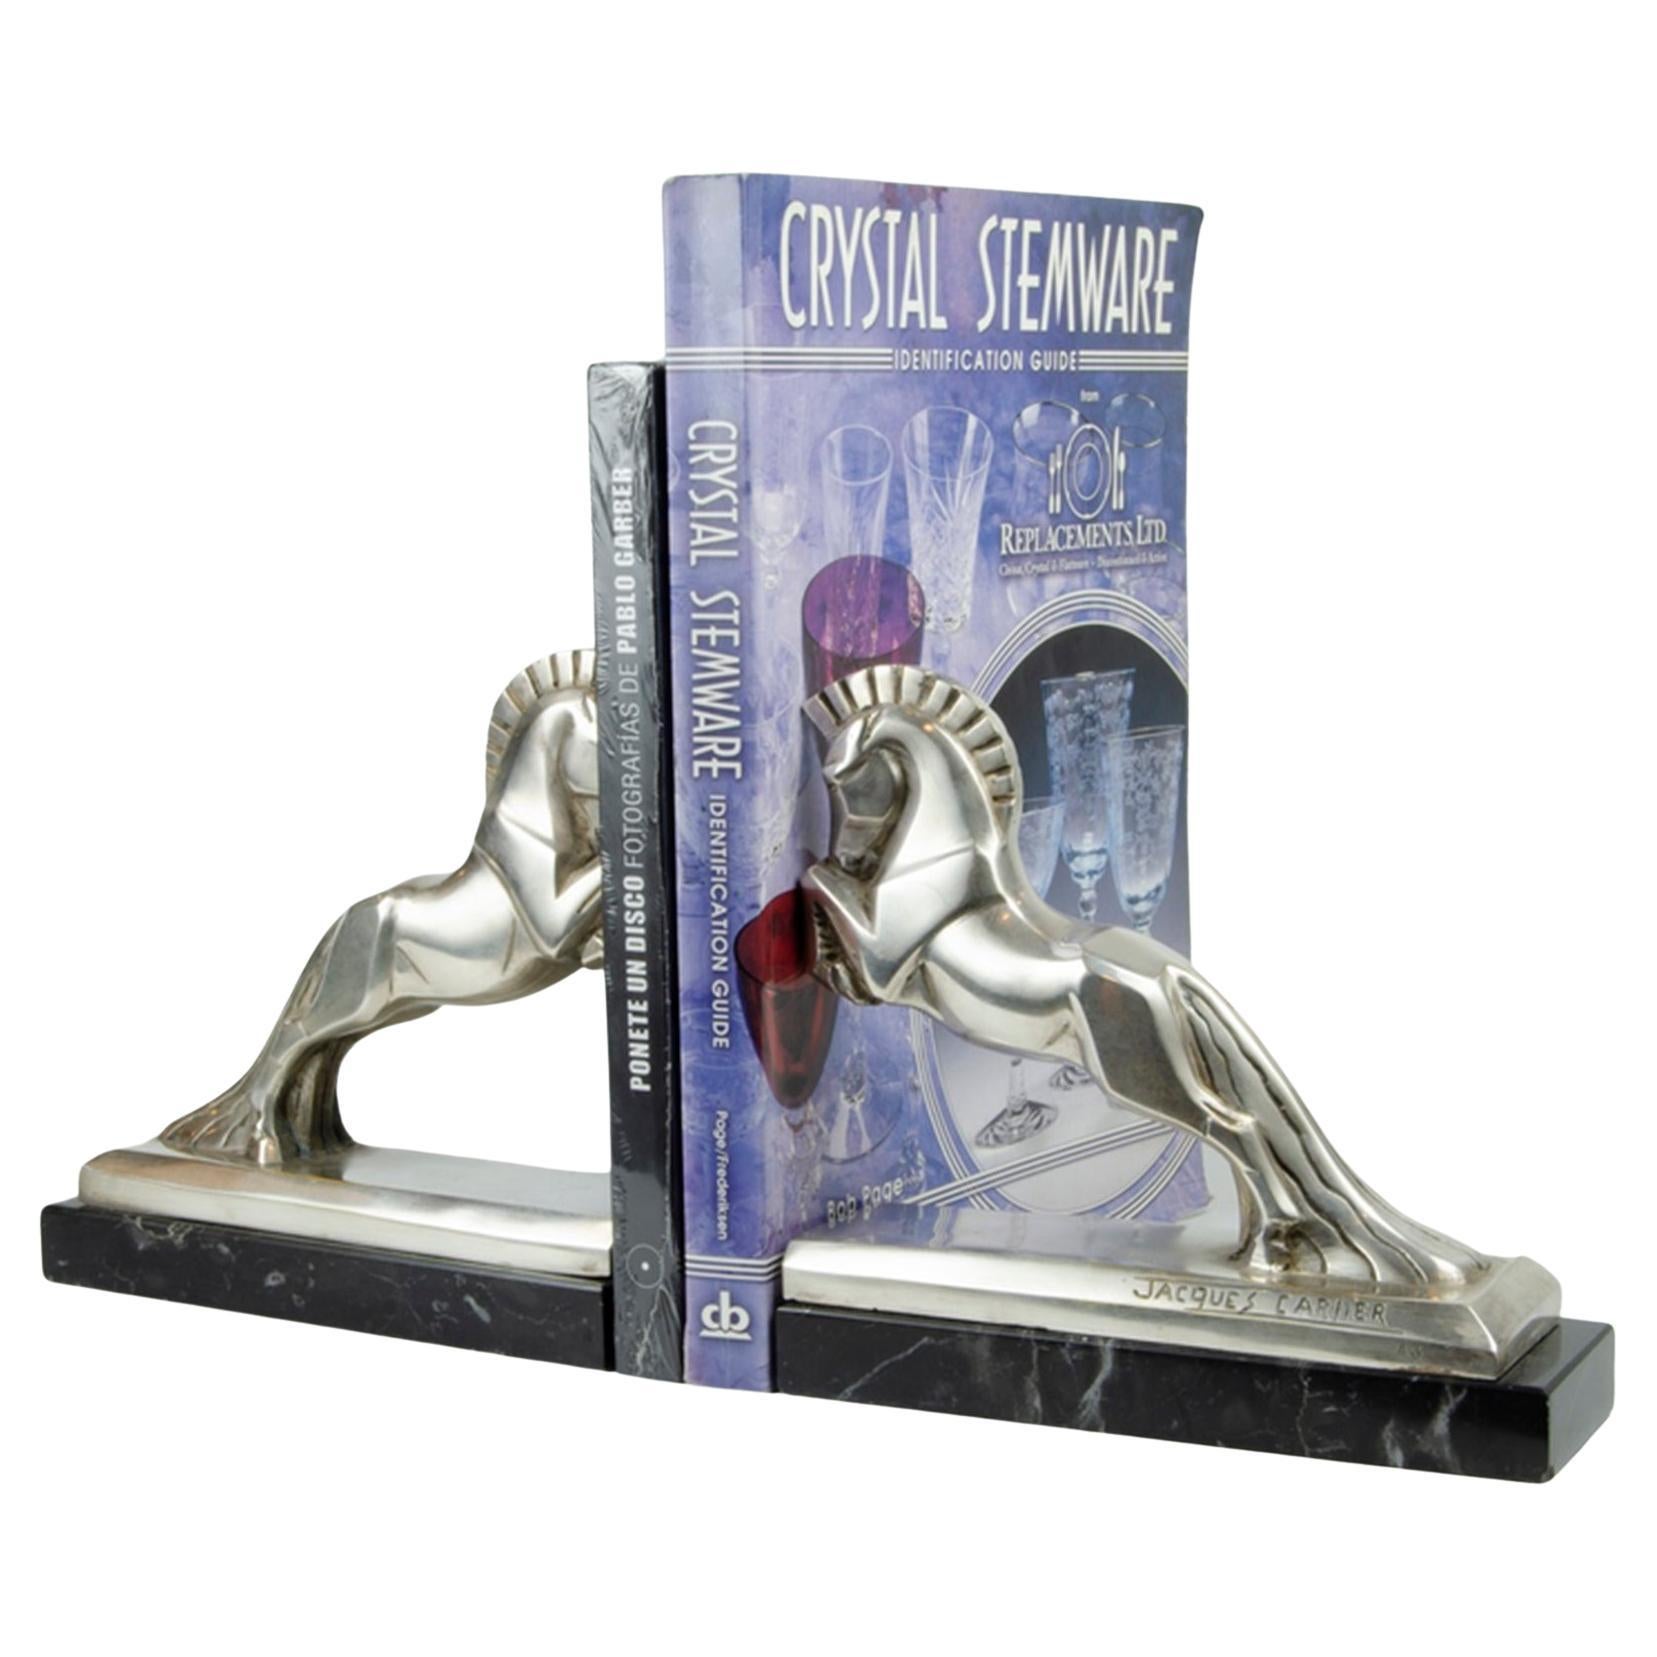 Art Deco Jacques Cartier horse bookends bronze sculpture. c 1925 France. A stunning pair of art deco stylized bookends. Silvered plated bronze Art Deco horse bookends by Jacques Cartier (French, 1907-2001). Both signed and numbered. Jacques Cartier